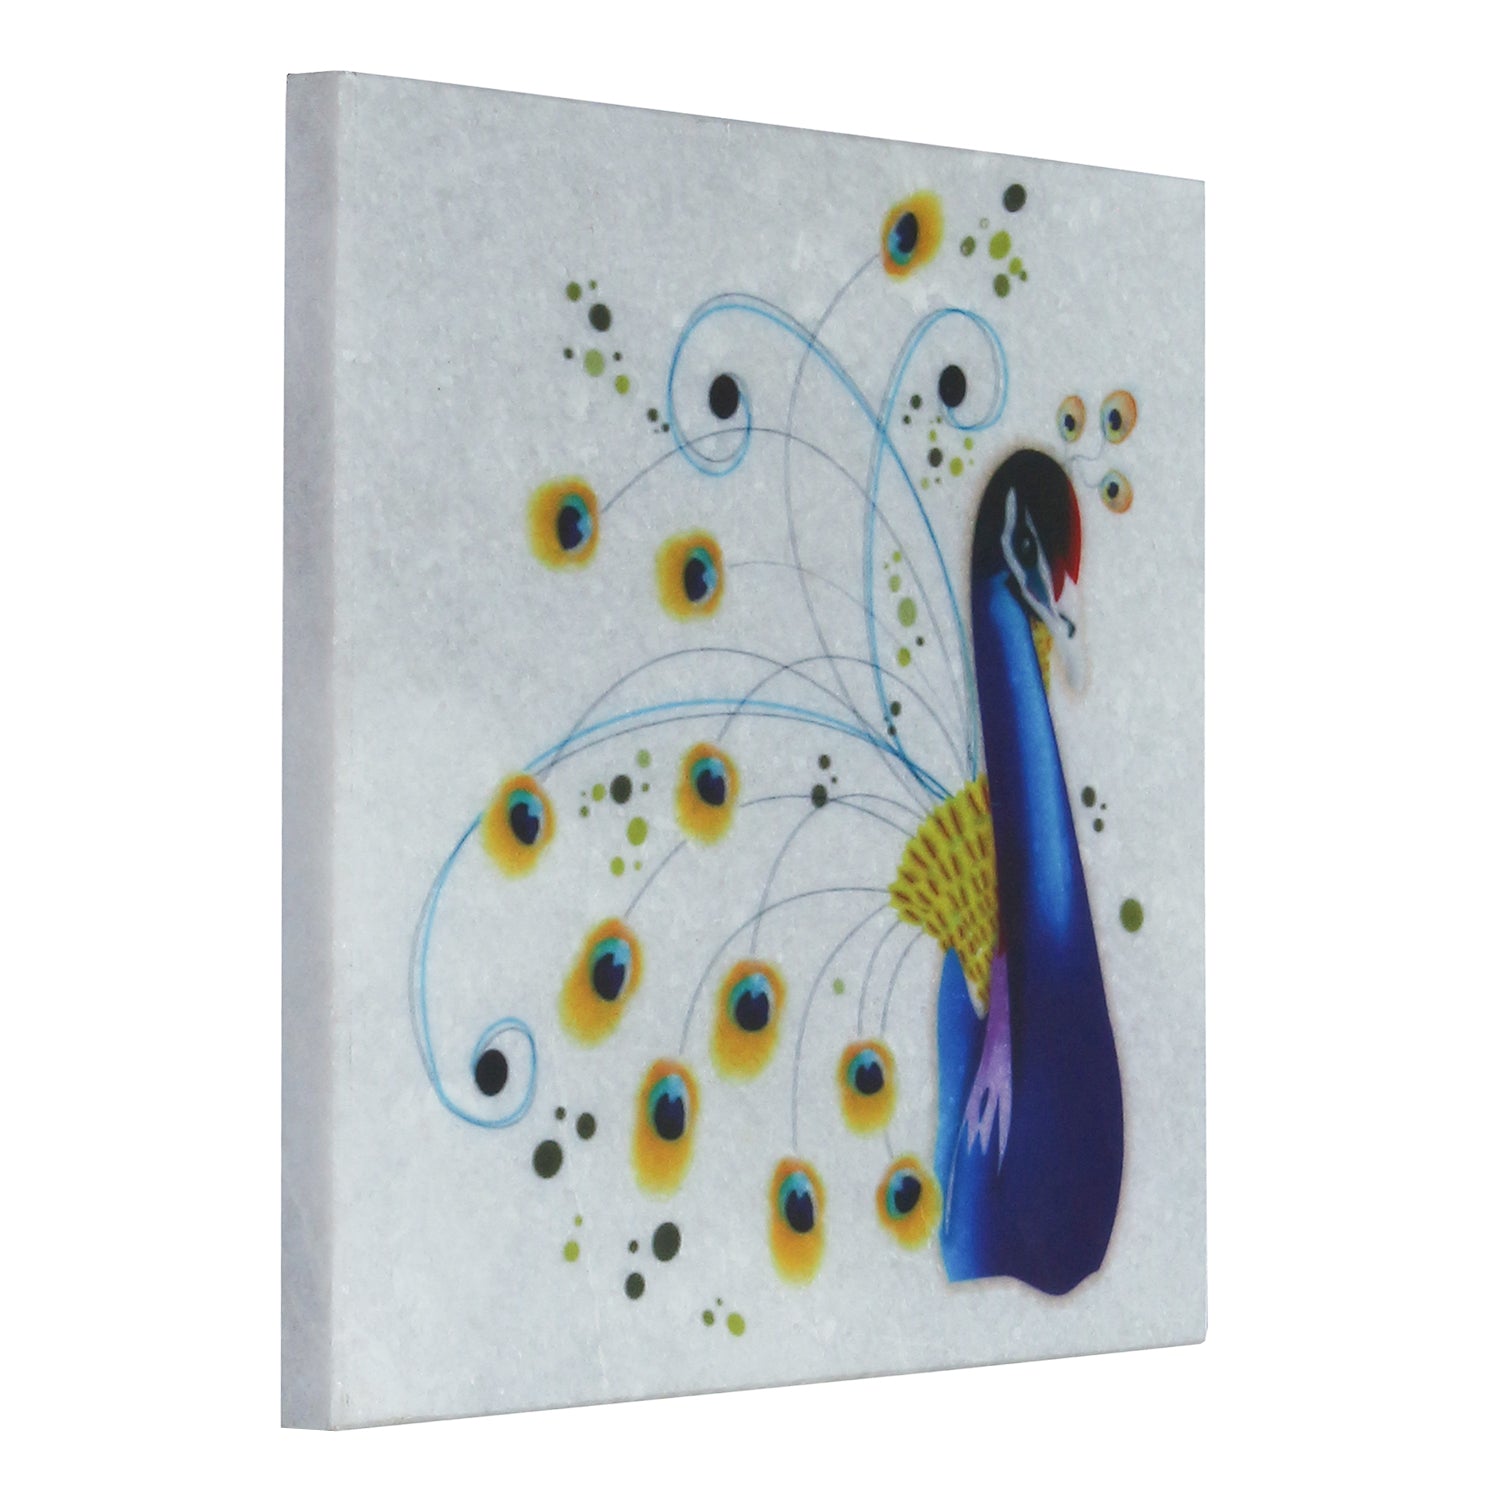 Colorful Dancing Peacock Painting On Marble Square Tile 4